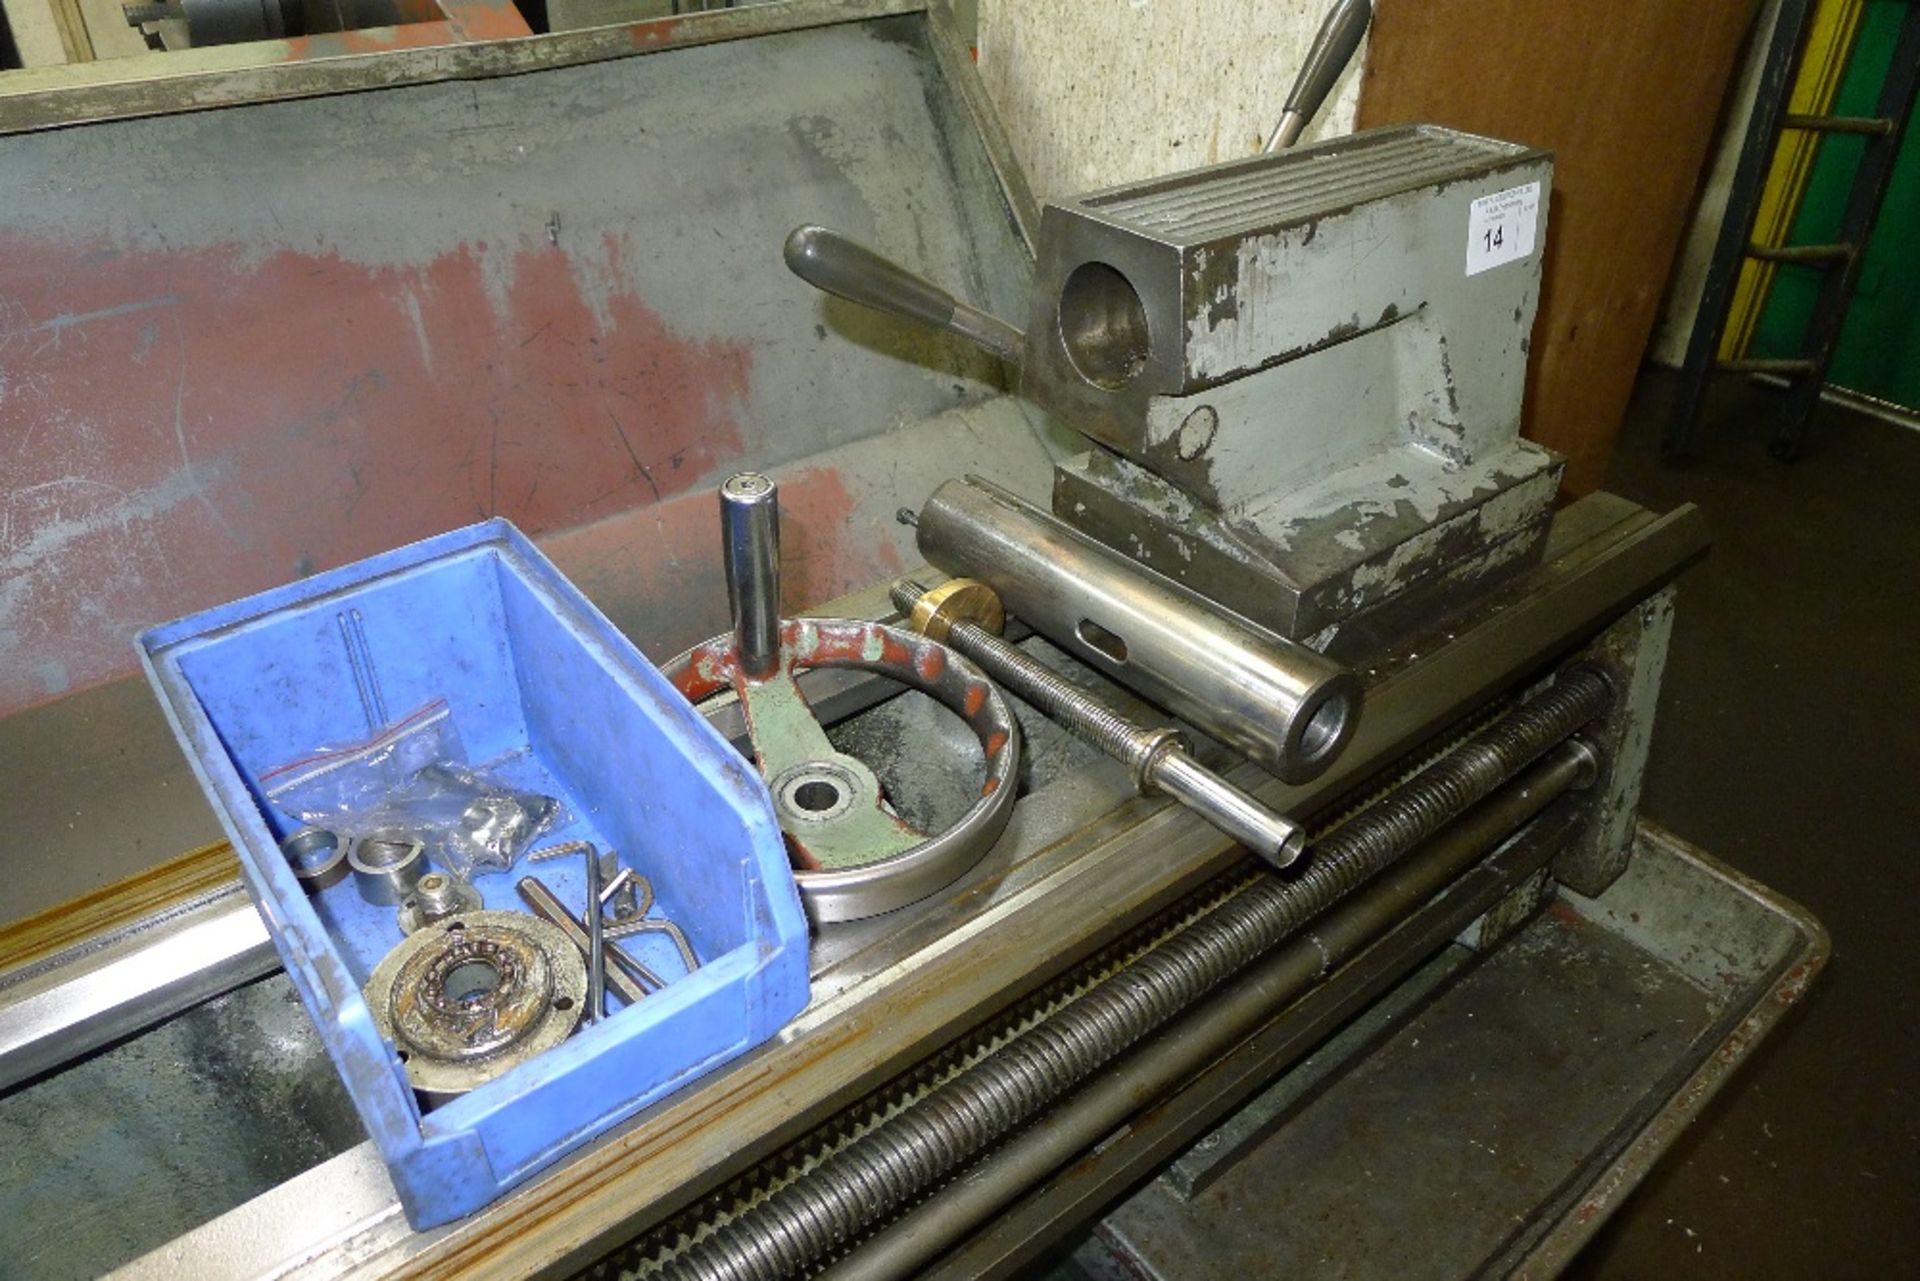 1 Colchester centre lathe type Triumph 2000 serial no. 6/0004/04642, 3ph, overall bed length 1.8m, - Image 4 of 8